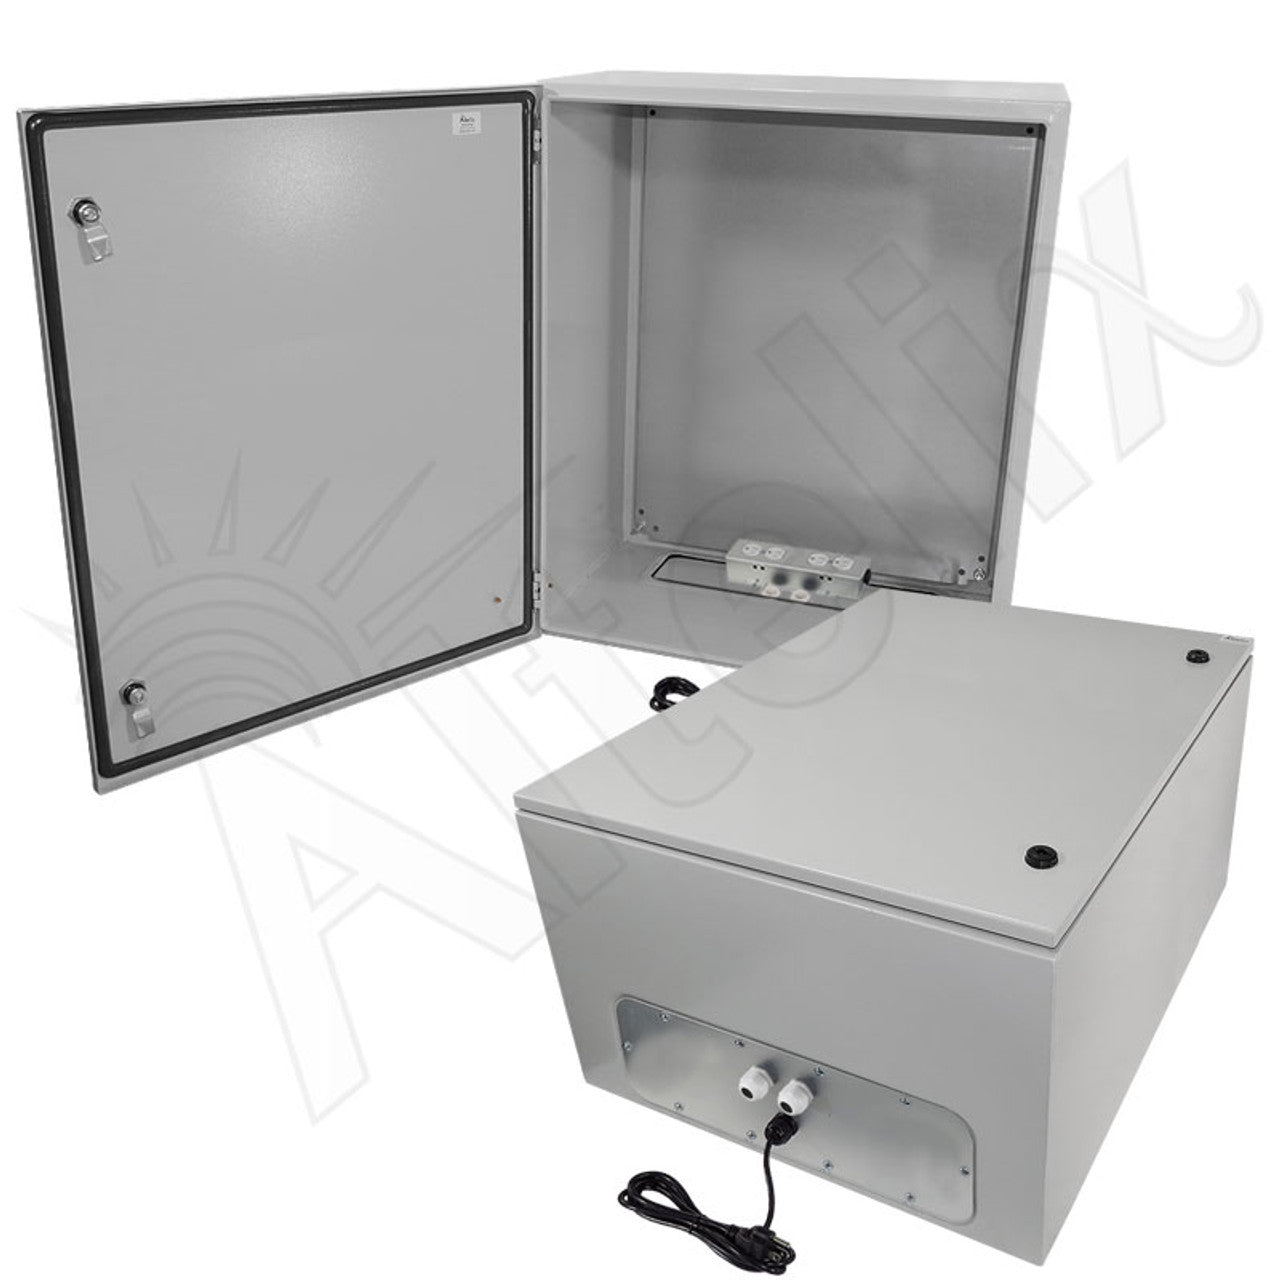 Altelix NEMA 4X Steel Weatherproof Enclosure with 120 VAC Outlets and Power Cord